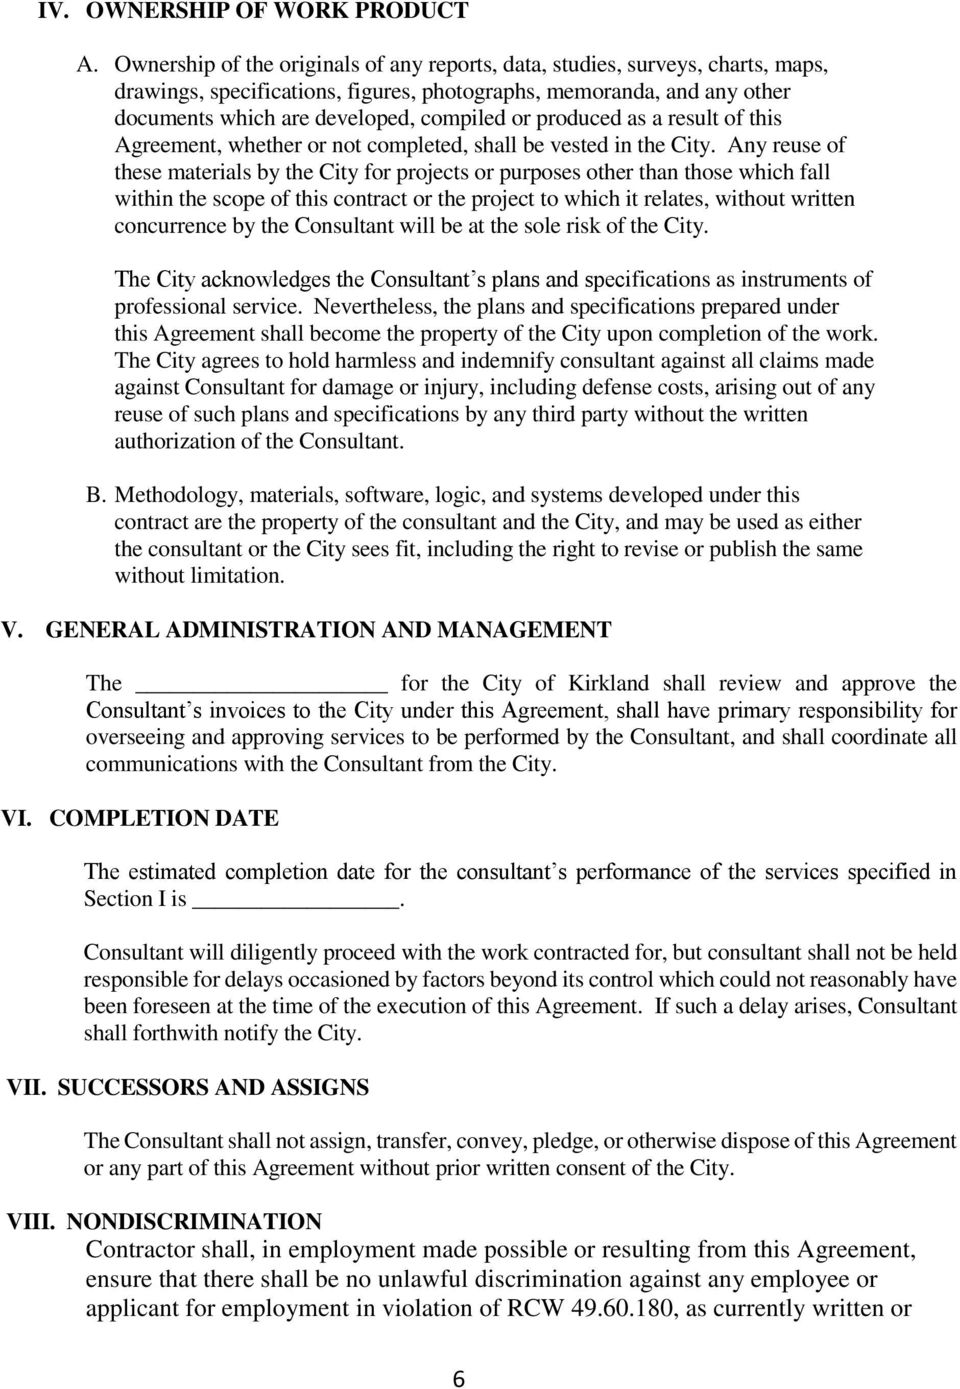 produced as a result of this Agreement, whether or not completed, shall be vested in the City.